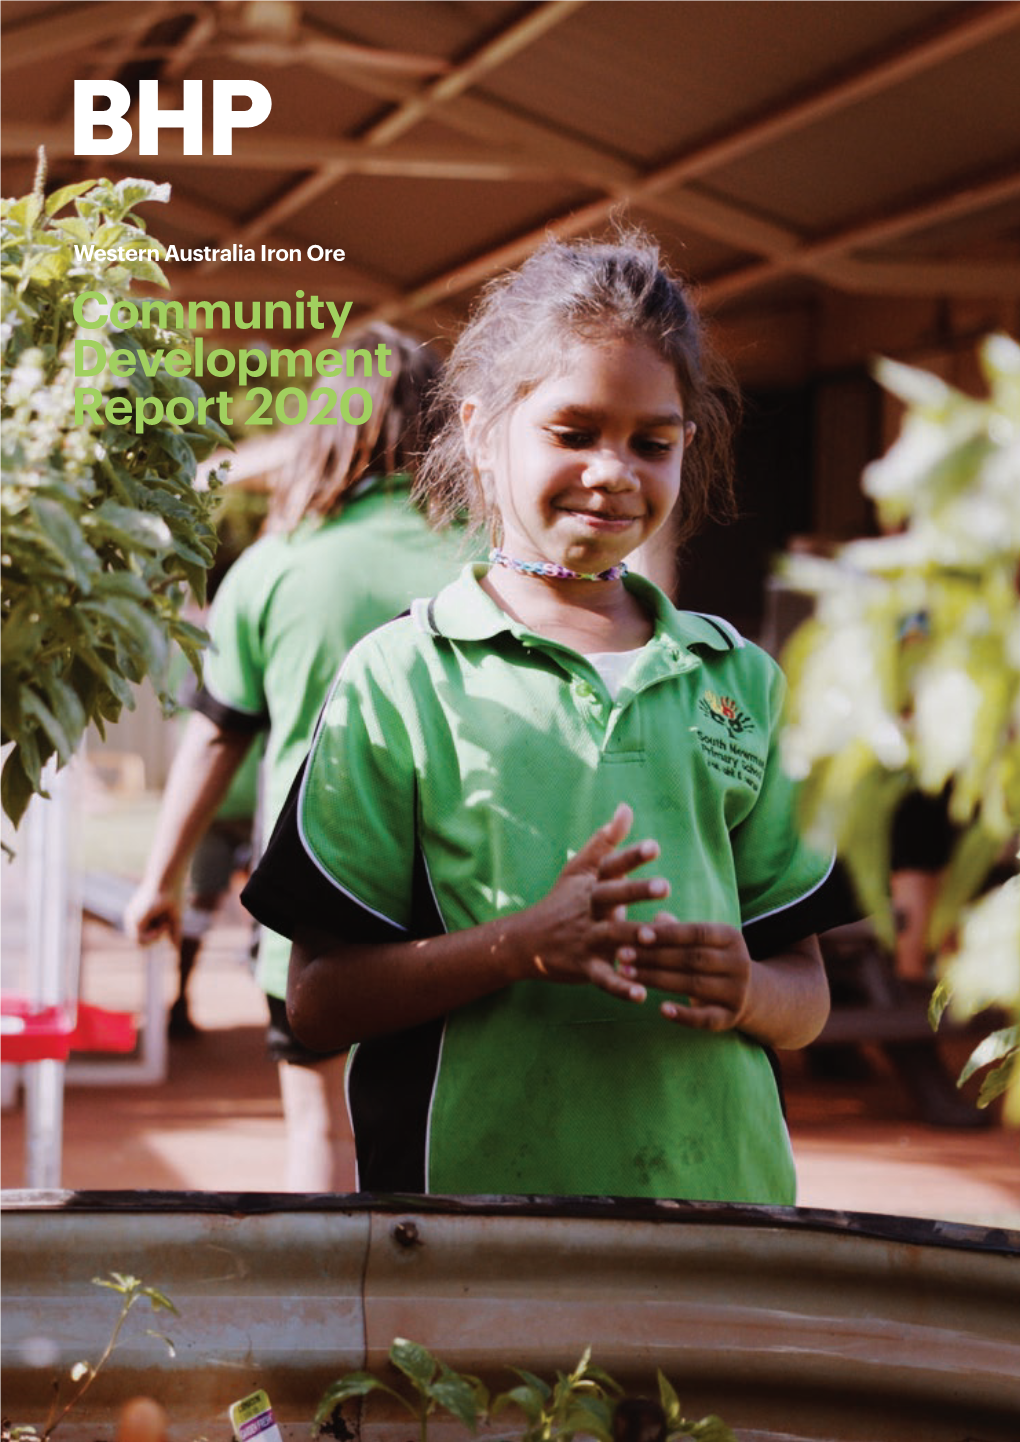 Community Development Report 2020 Our Purpose Is to Bring People and Resources Together to Build a Better World